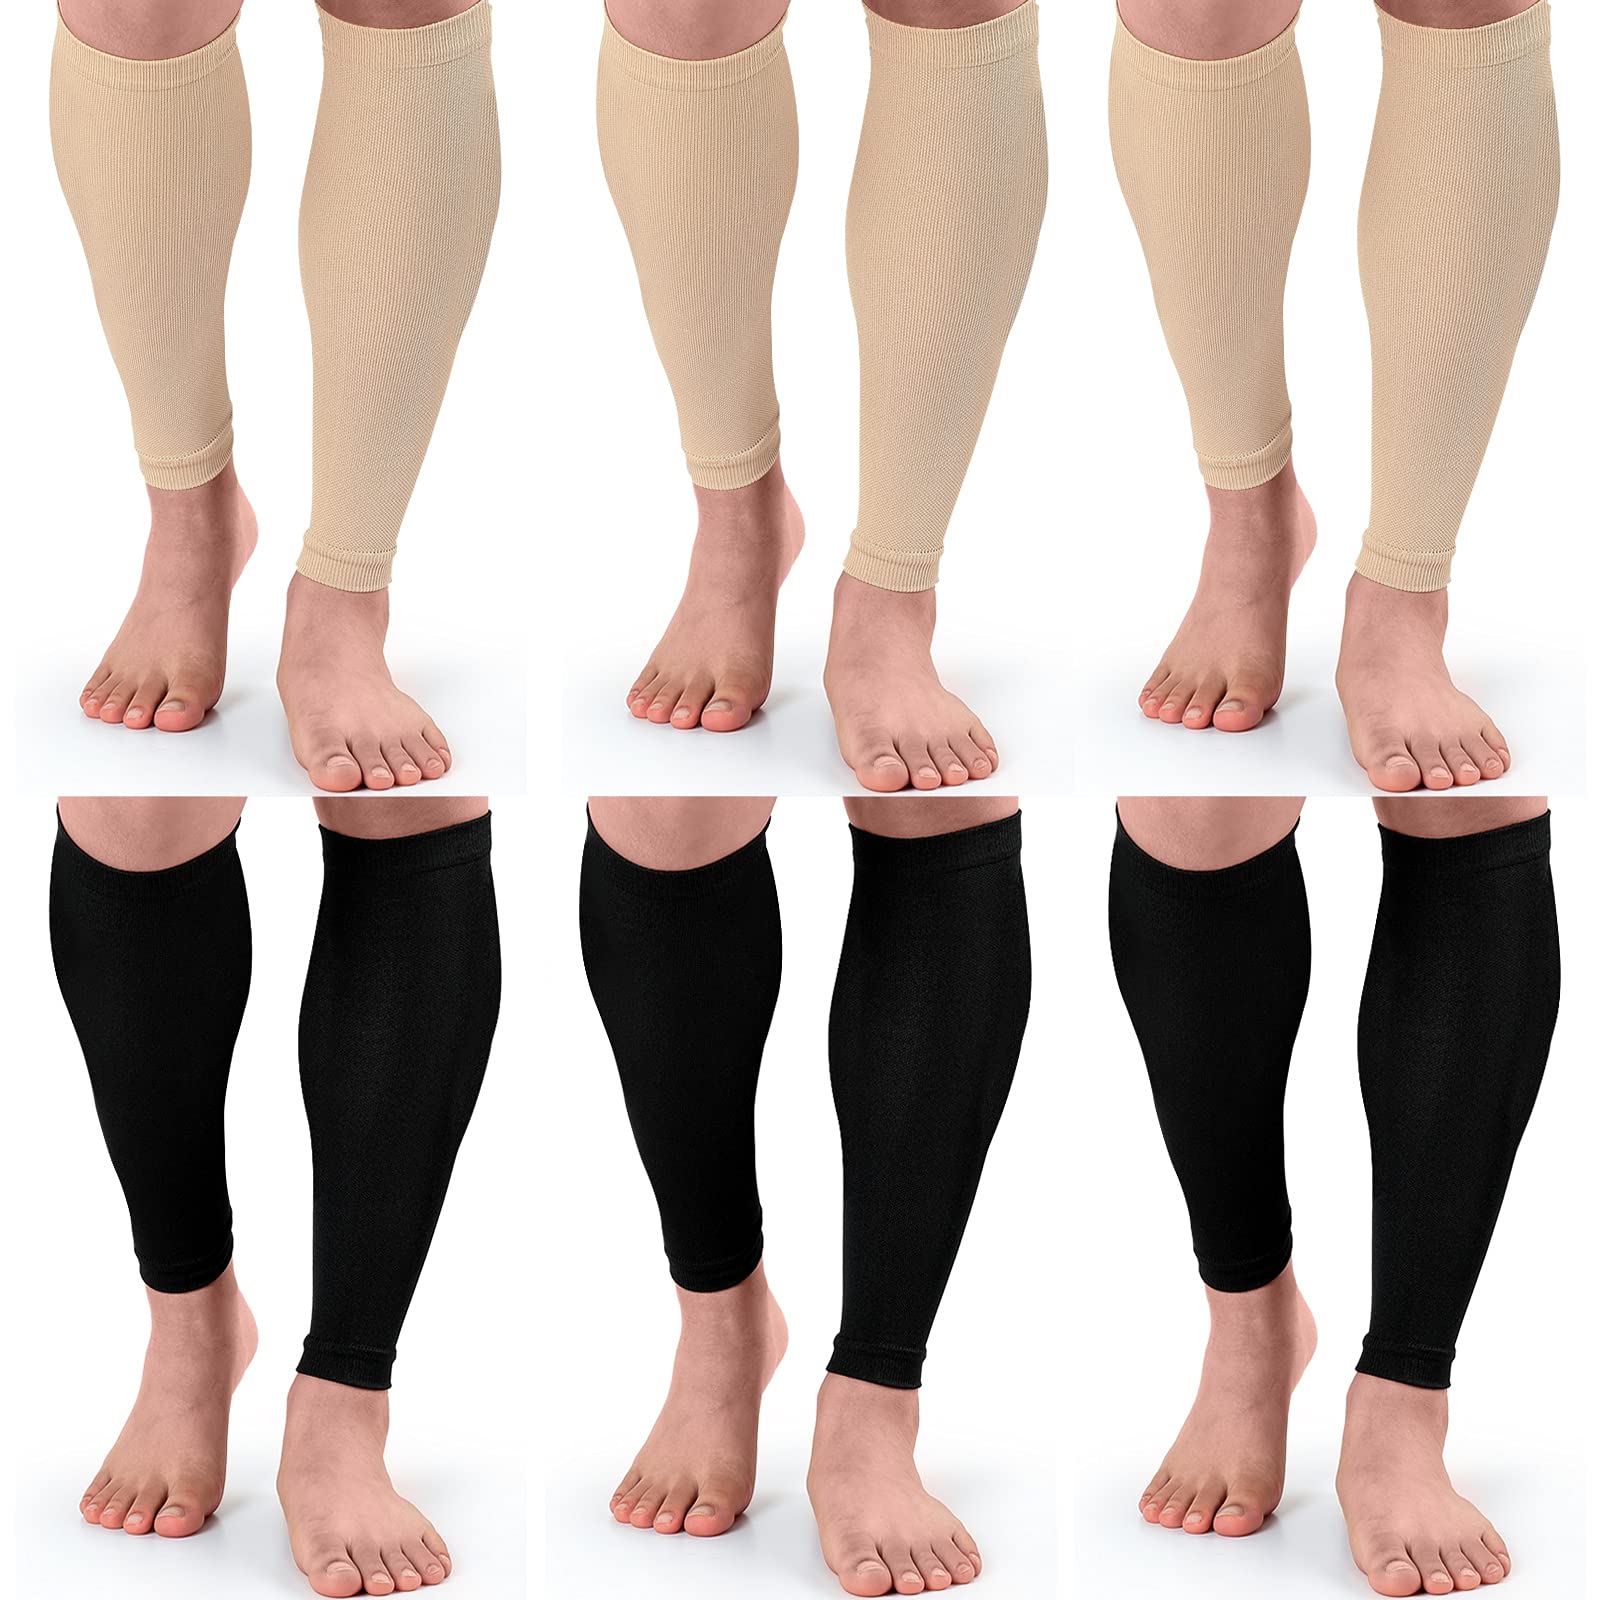 Coume 6 Pairs Leg Compression Sleeves Calf Compression Socks for Women Men  Footless Leg Support Brace for Running Cycling Shin Splint Swelling Varicose  Veins Pain Relief (Black and Beige Large/XXL) Black and